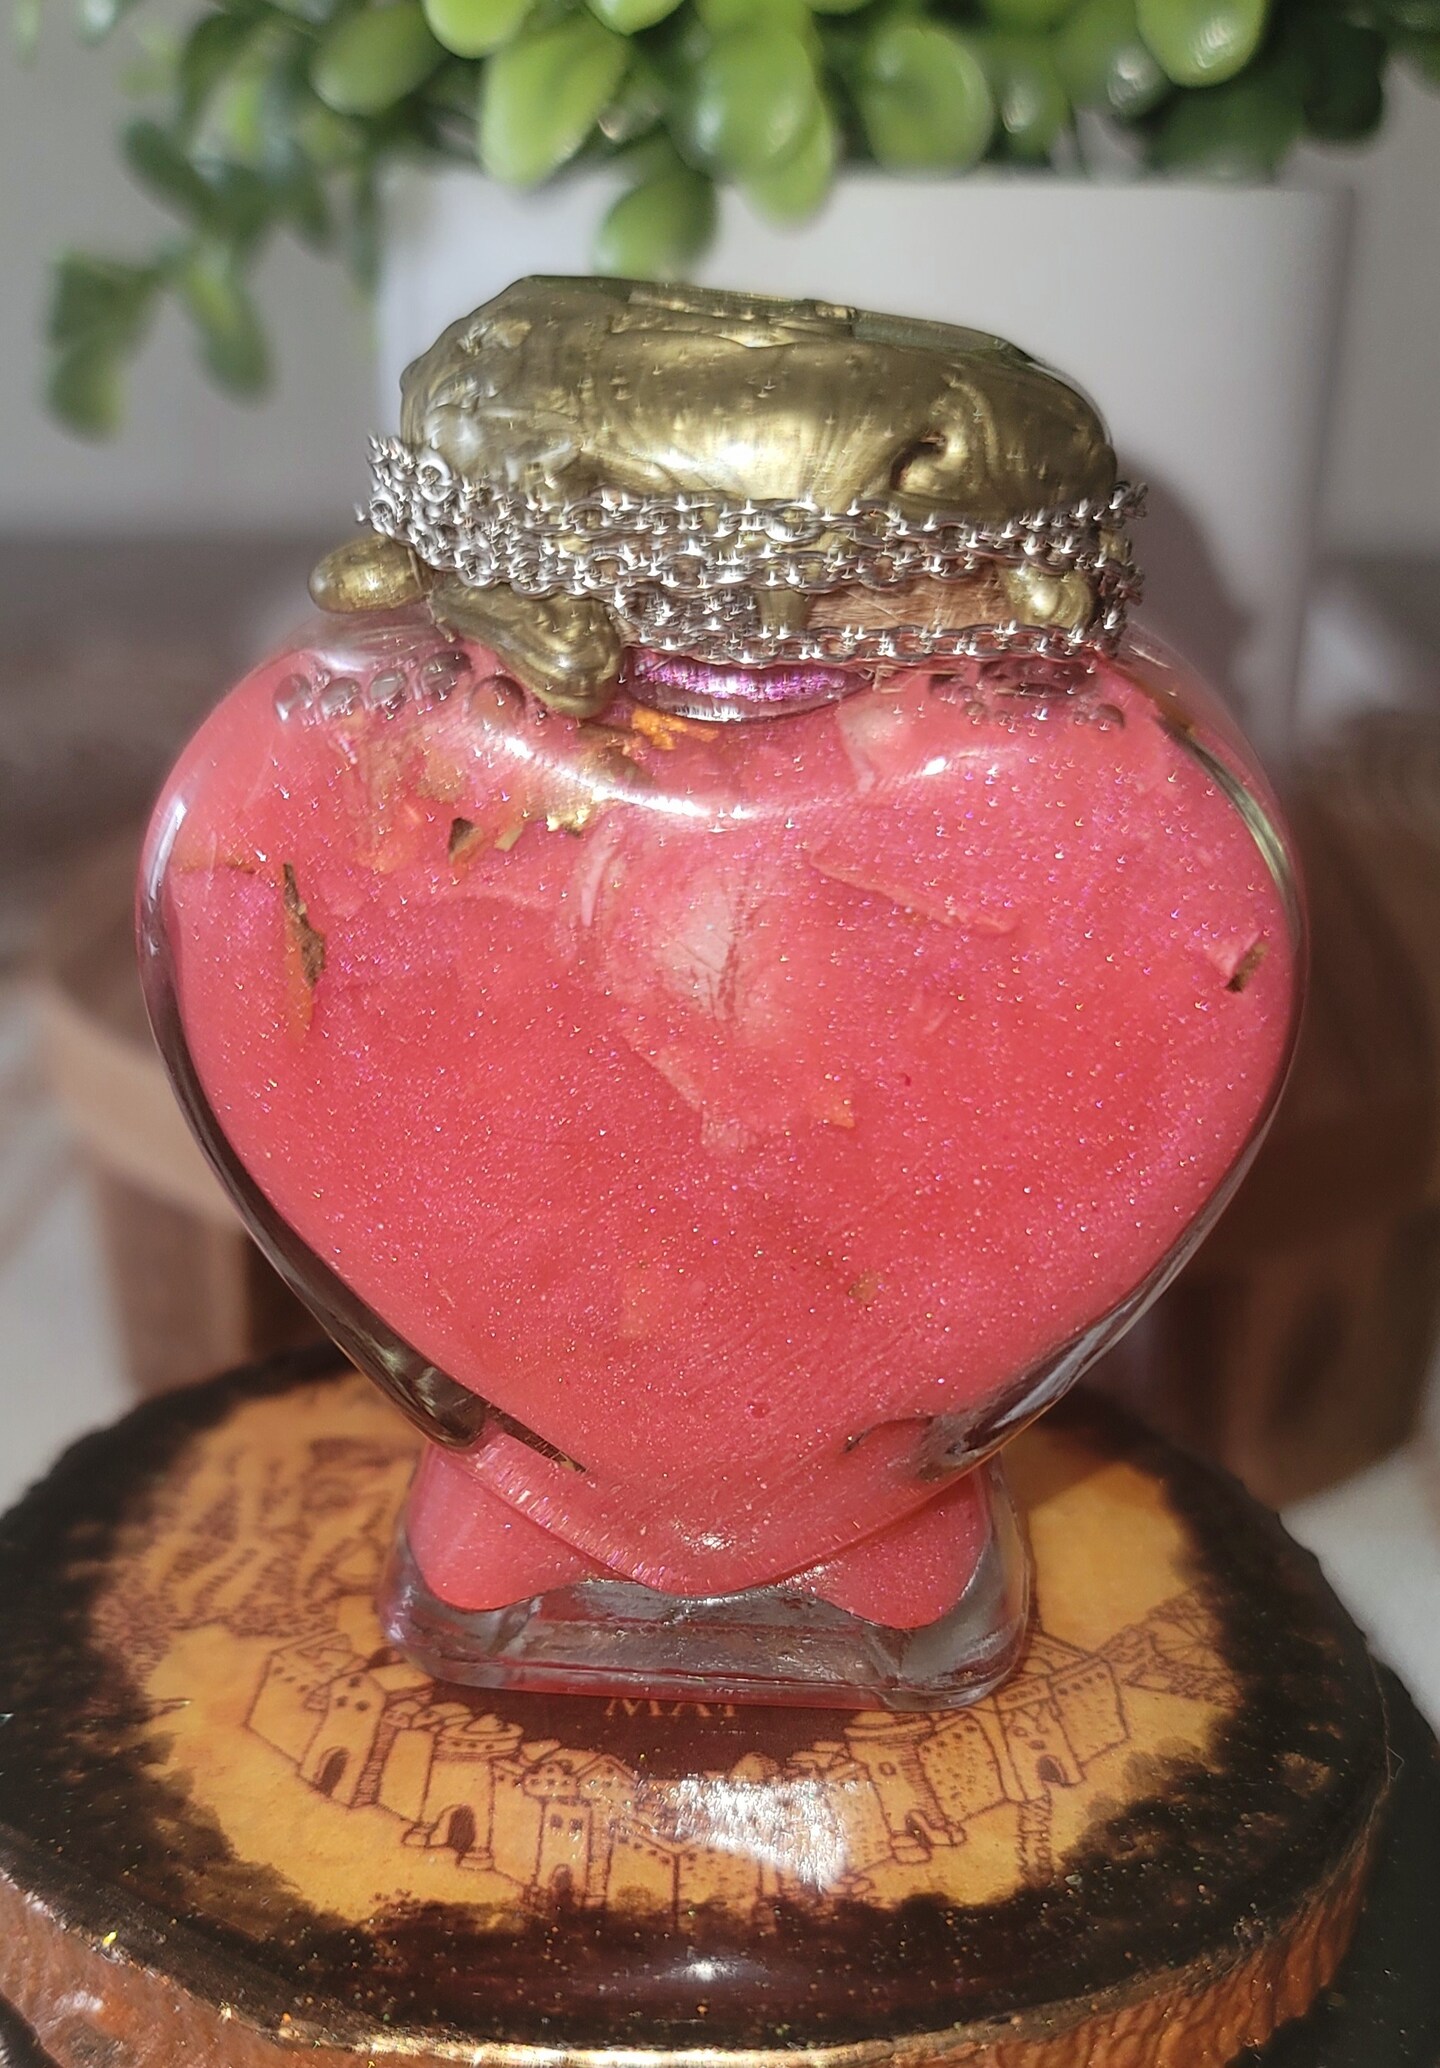 Wild Love Apothecary - Invoking Eros: a Love Potion Crafting + Sex Magic  Playshop February 16 5-7pm In the afterglow of Valentine's Day, join Toska  for an evening of magic, love spells